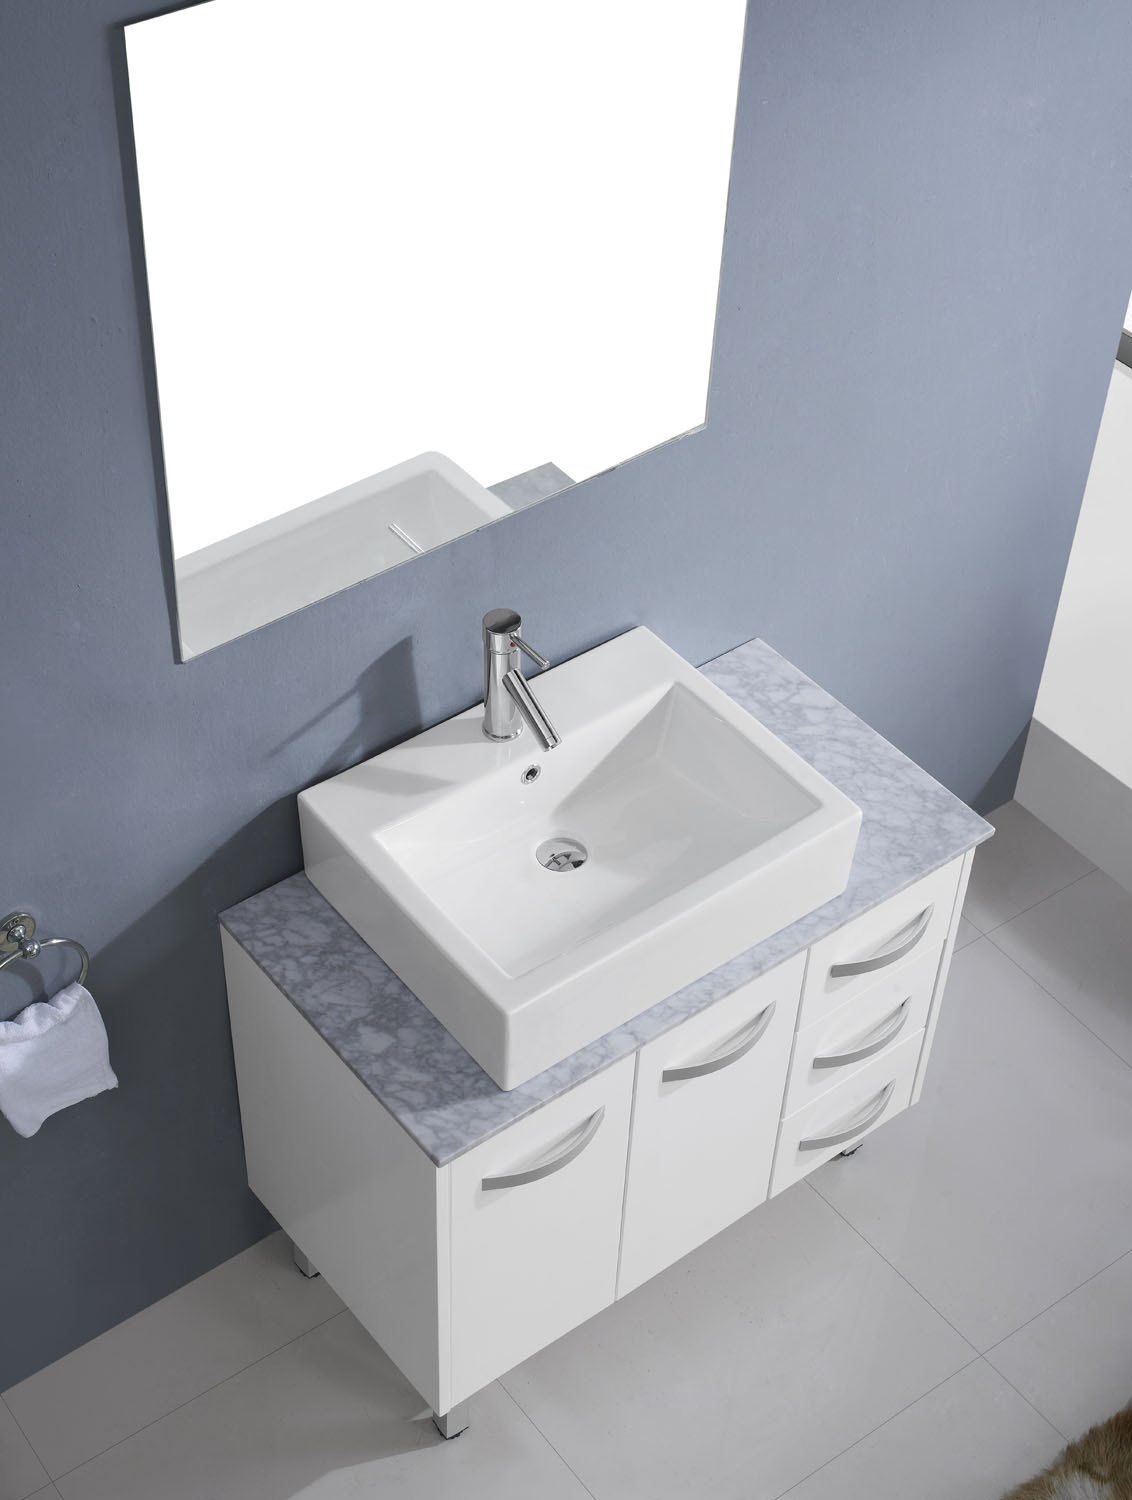 Virtu USA Tilda 36" Single Square Sink White Top Vanity in White with Polished Chrome Faucet and Mirror Vanity Virtu USA 